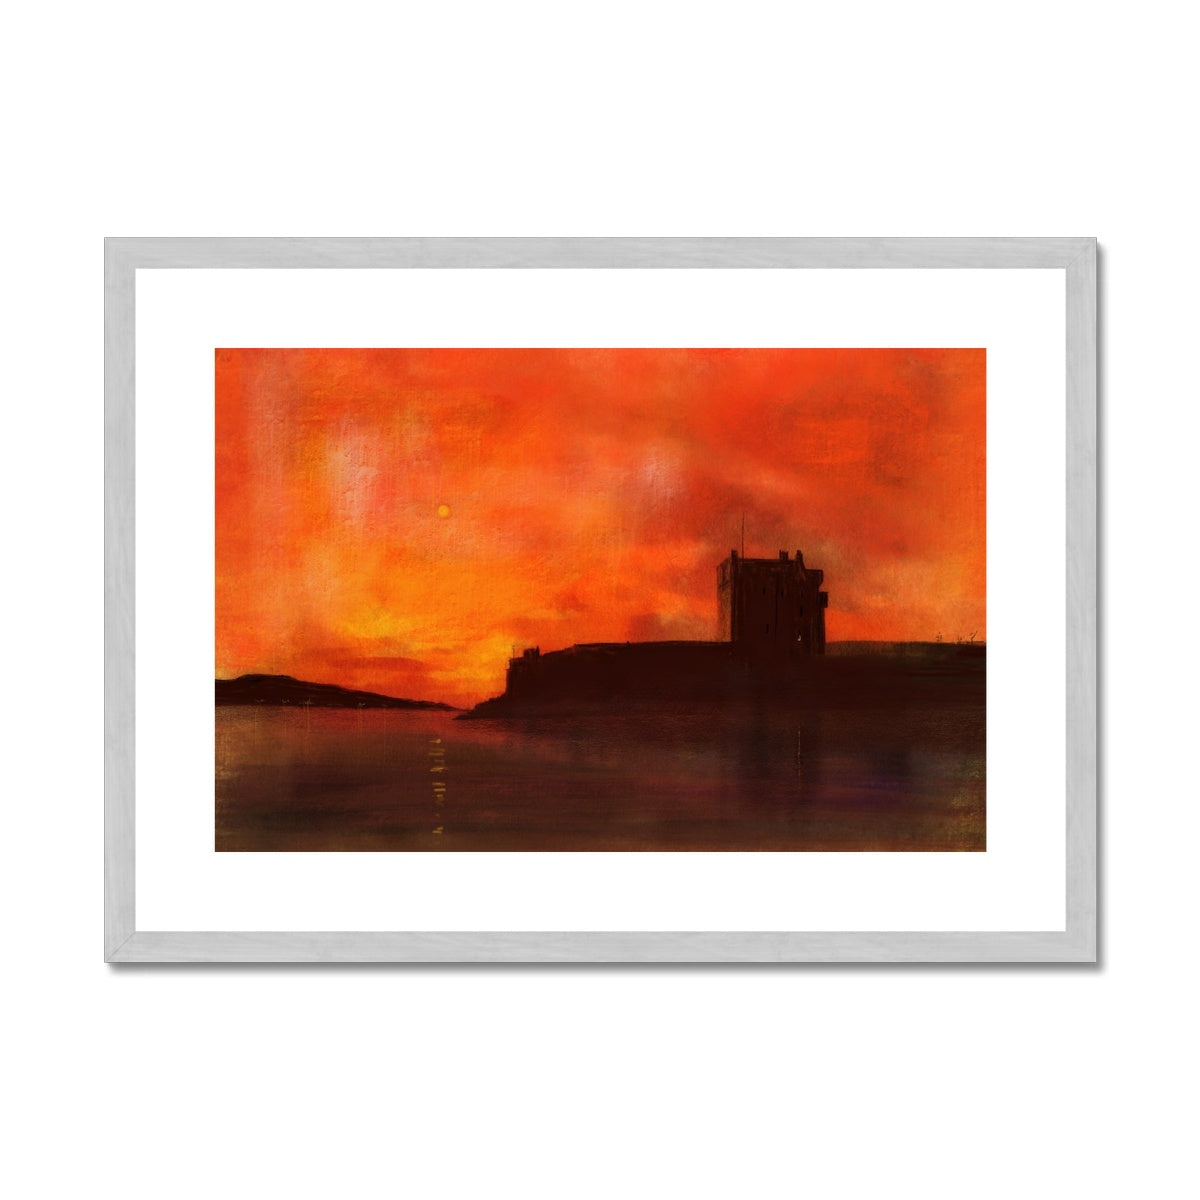 Broughty Castle Sunset Painting | Antique Framed & Mounted Prints From Scotland-Antique Framed & Mounted Prints-Scottish Castles Art Gallery-A2 Landscape-Silver Frame-Paintings, Prints, Homeware, Art Gifts From Scotland By Scottish Artist Kevin Hunter